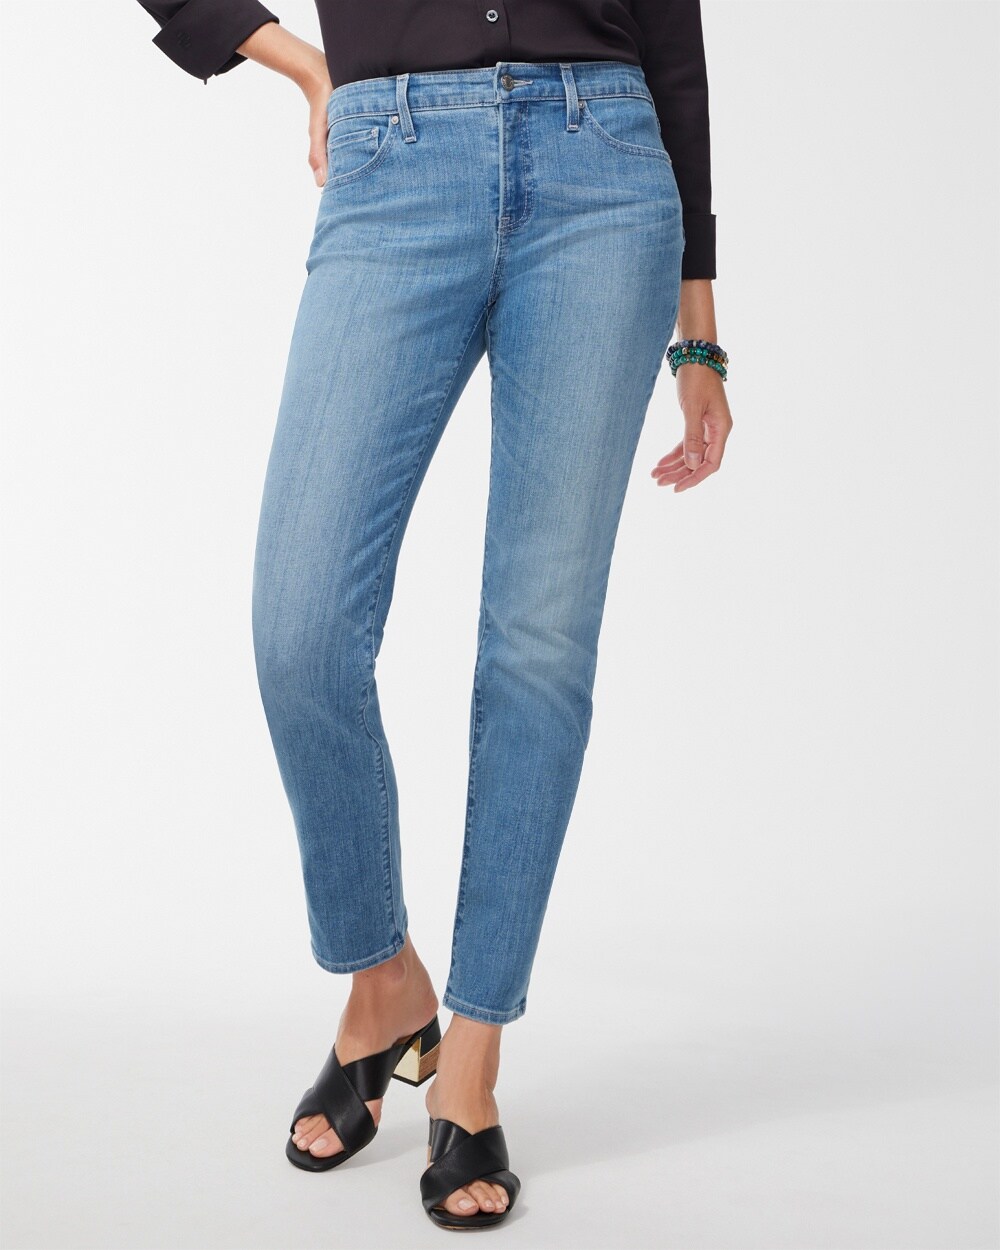 Chico's Girlfriend Ankle Jeans In Light Wash Denim